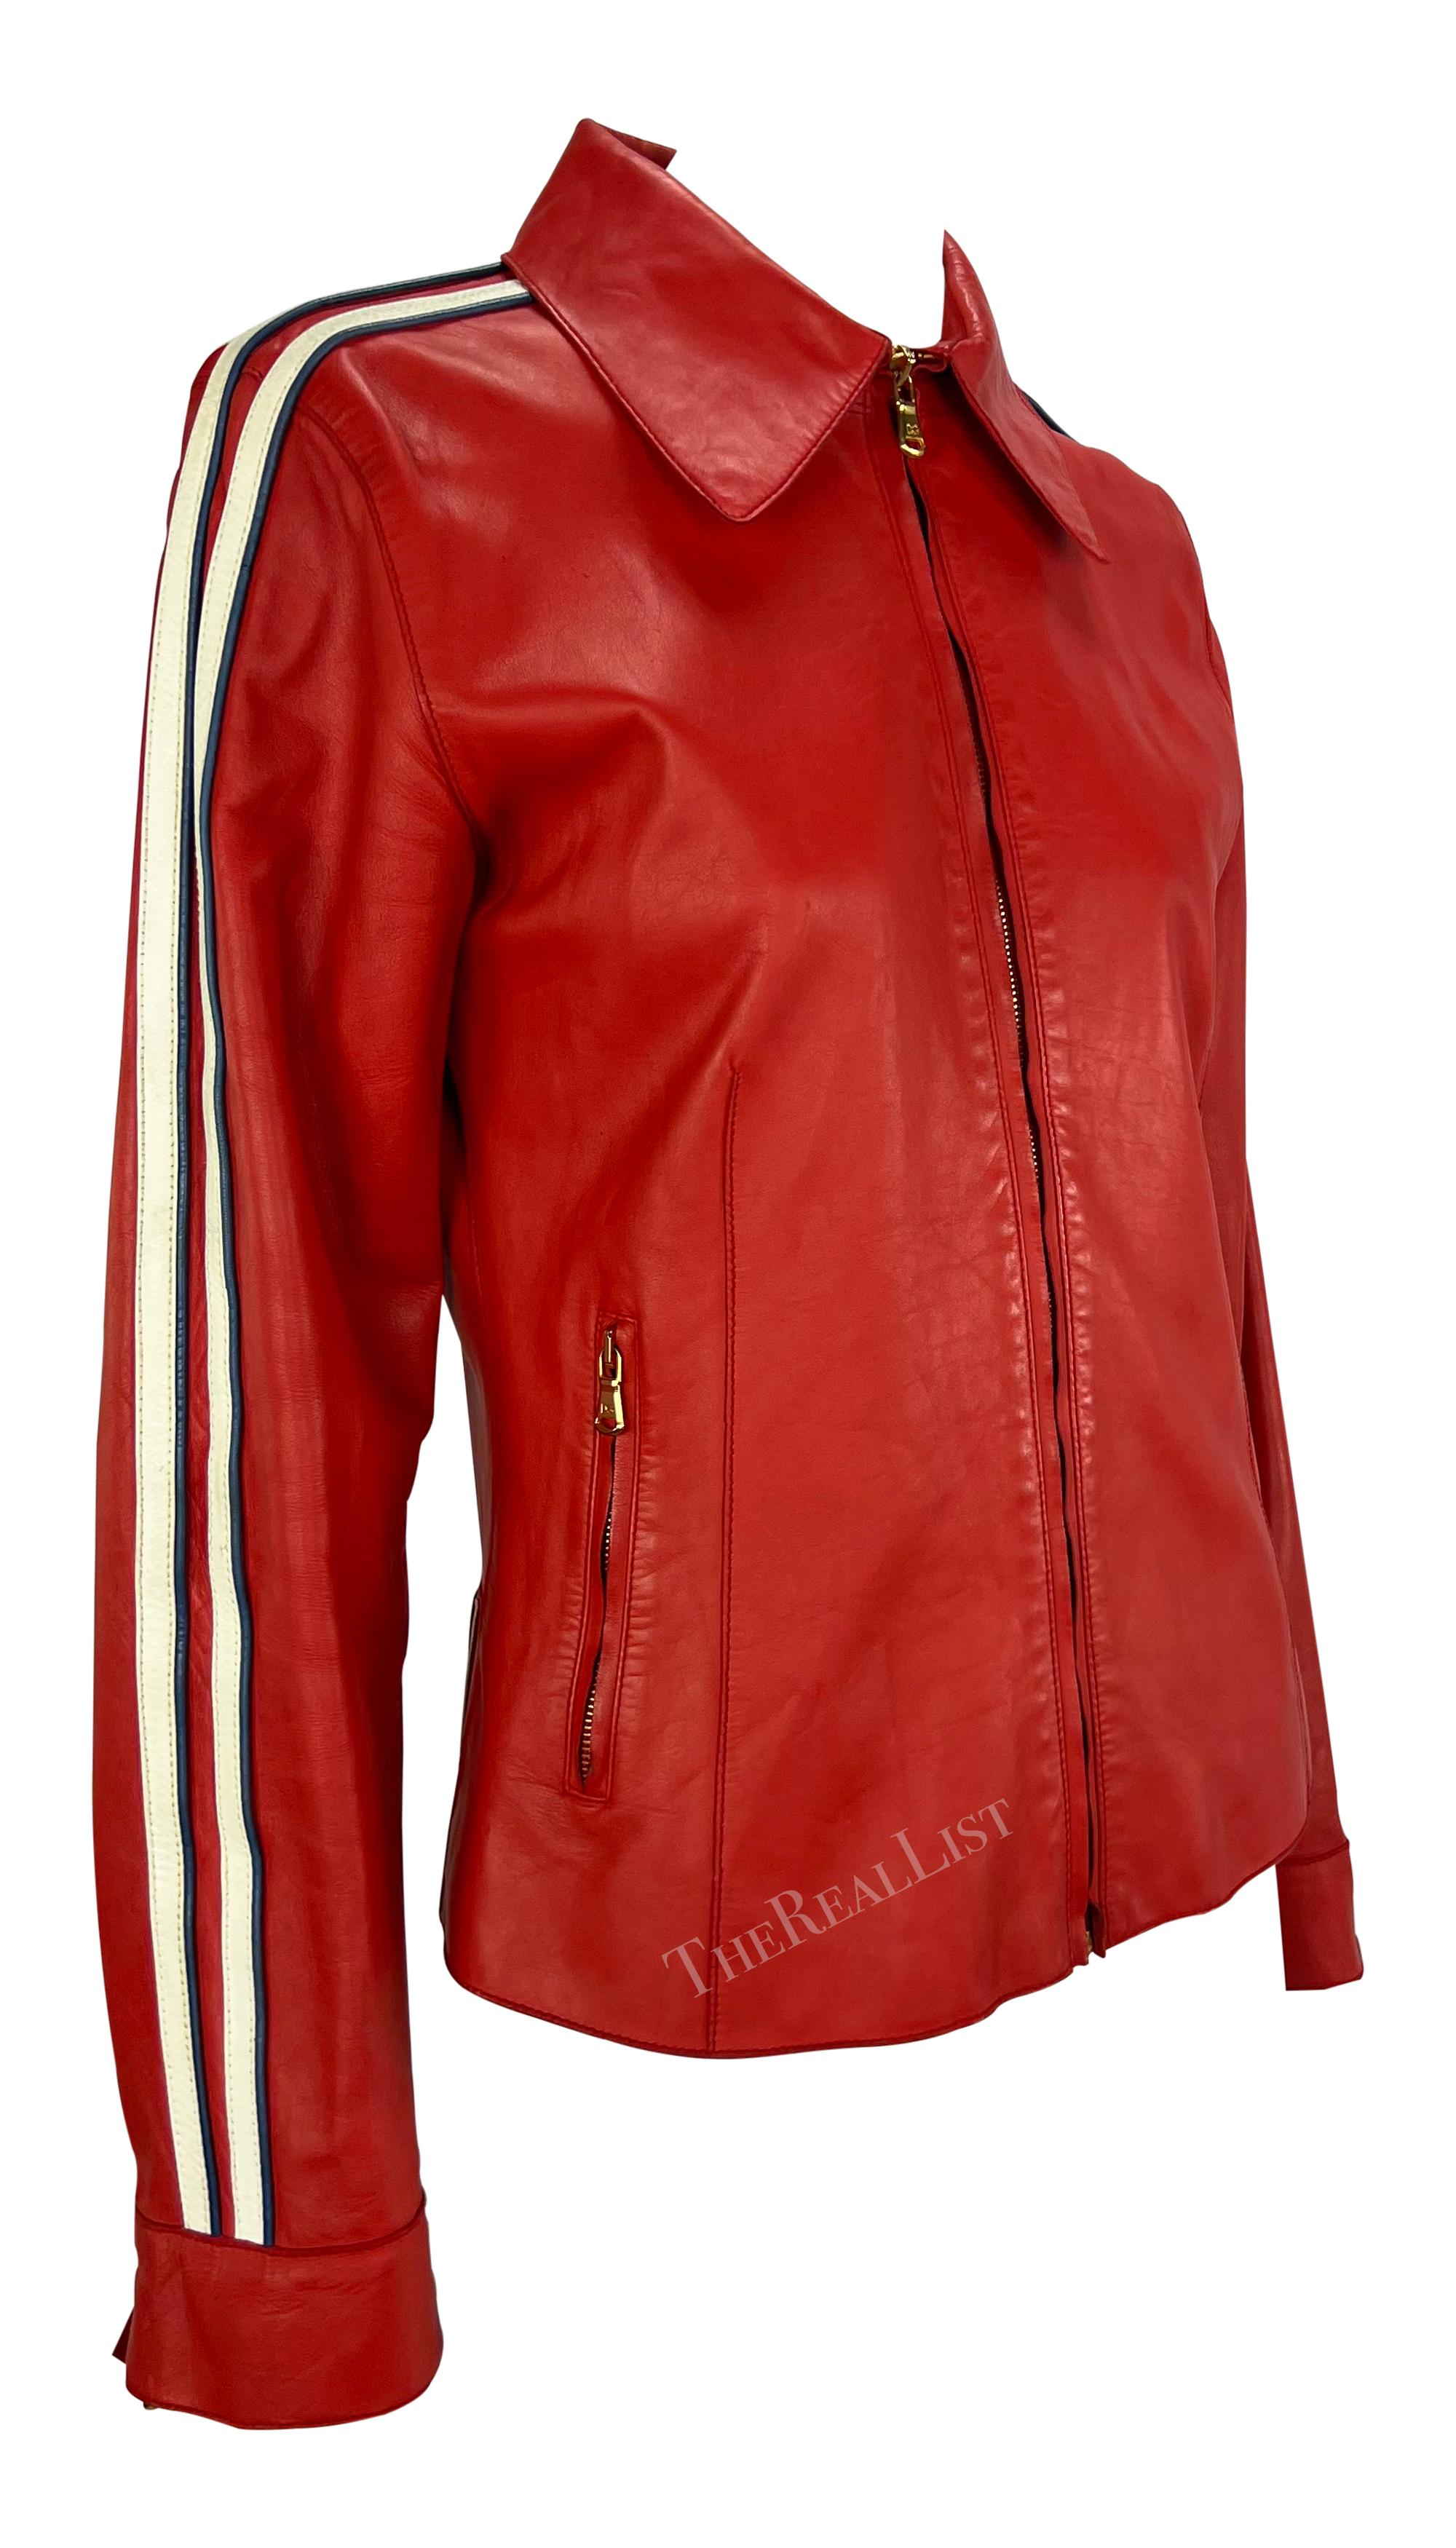 S/S 2001 Dolce & Gabbana Red Moto Style Leather Jacket In Good Condition For Sale In West Hollywood, CA